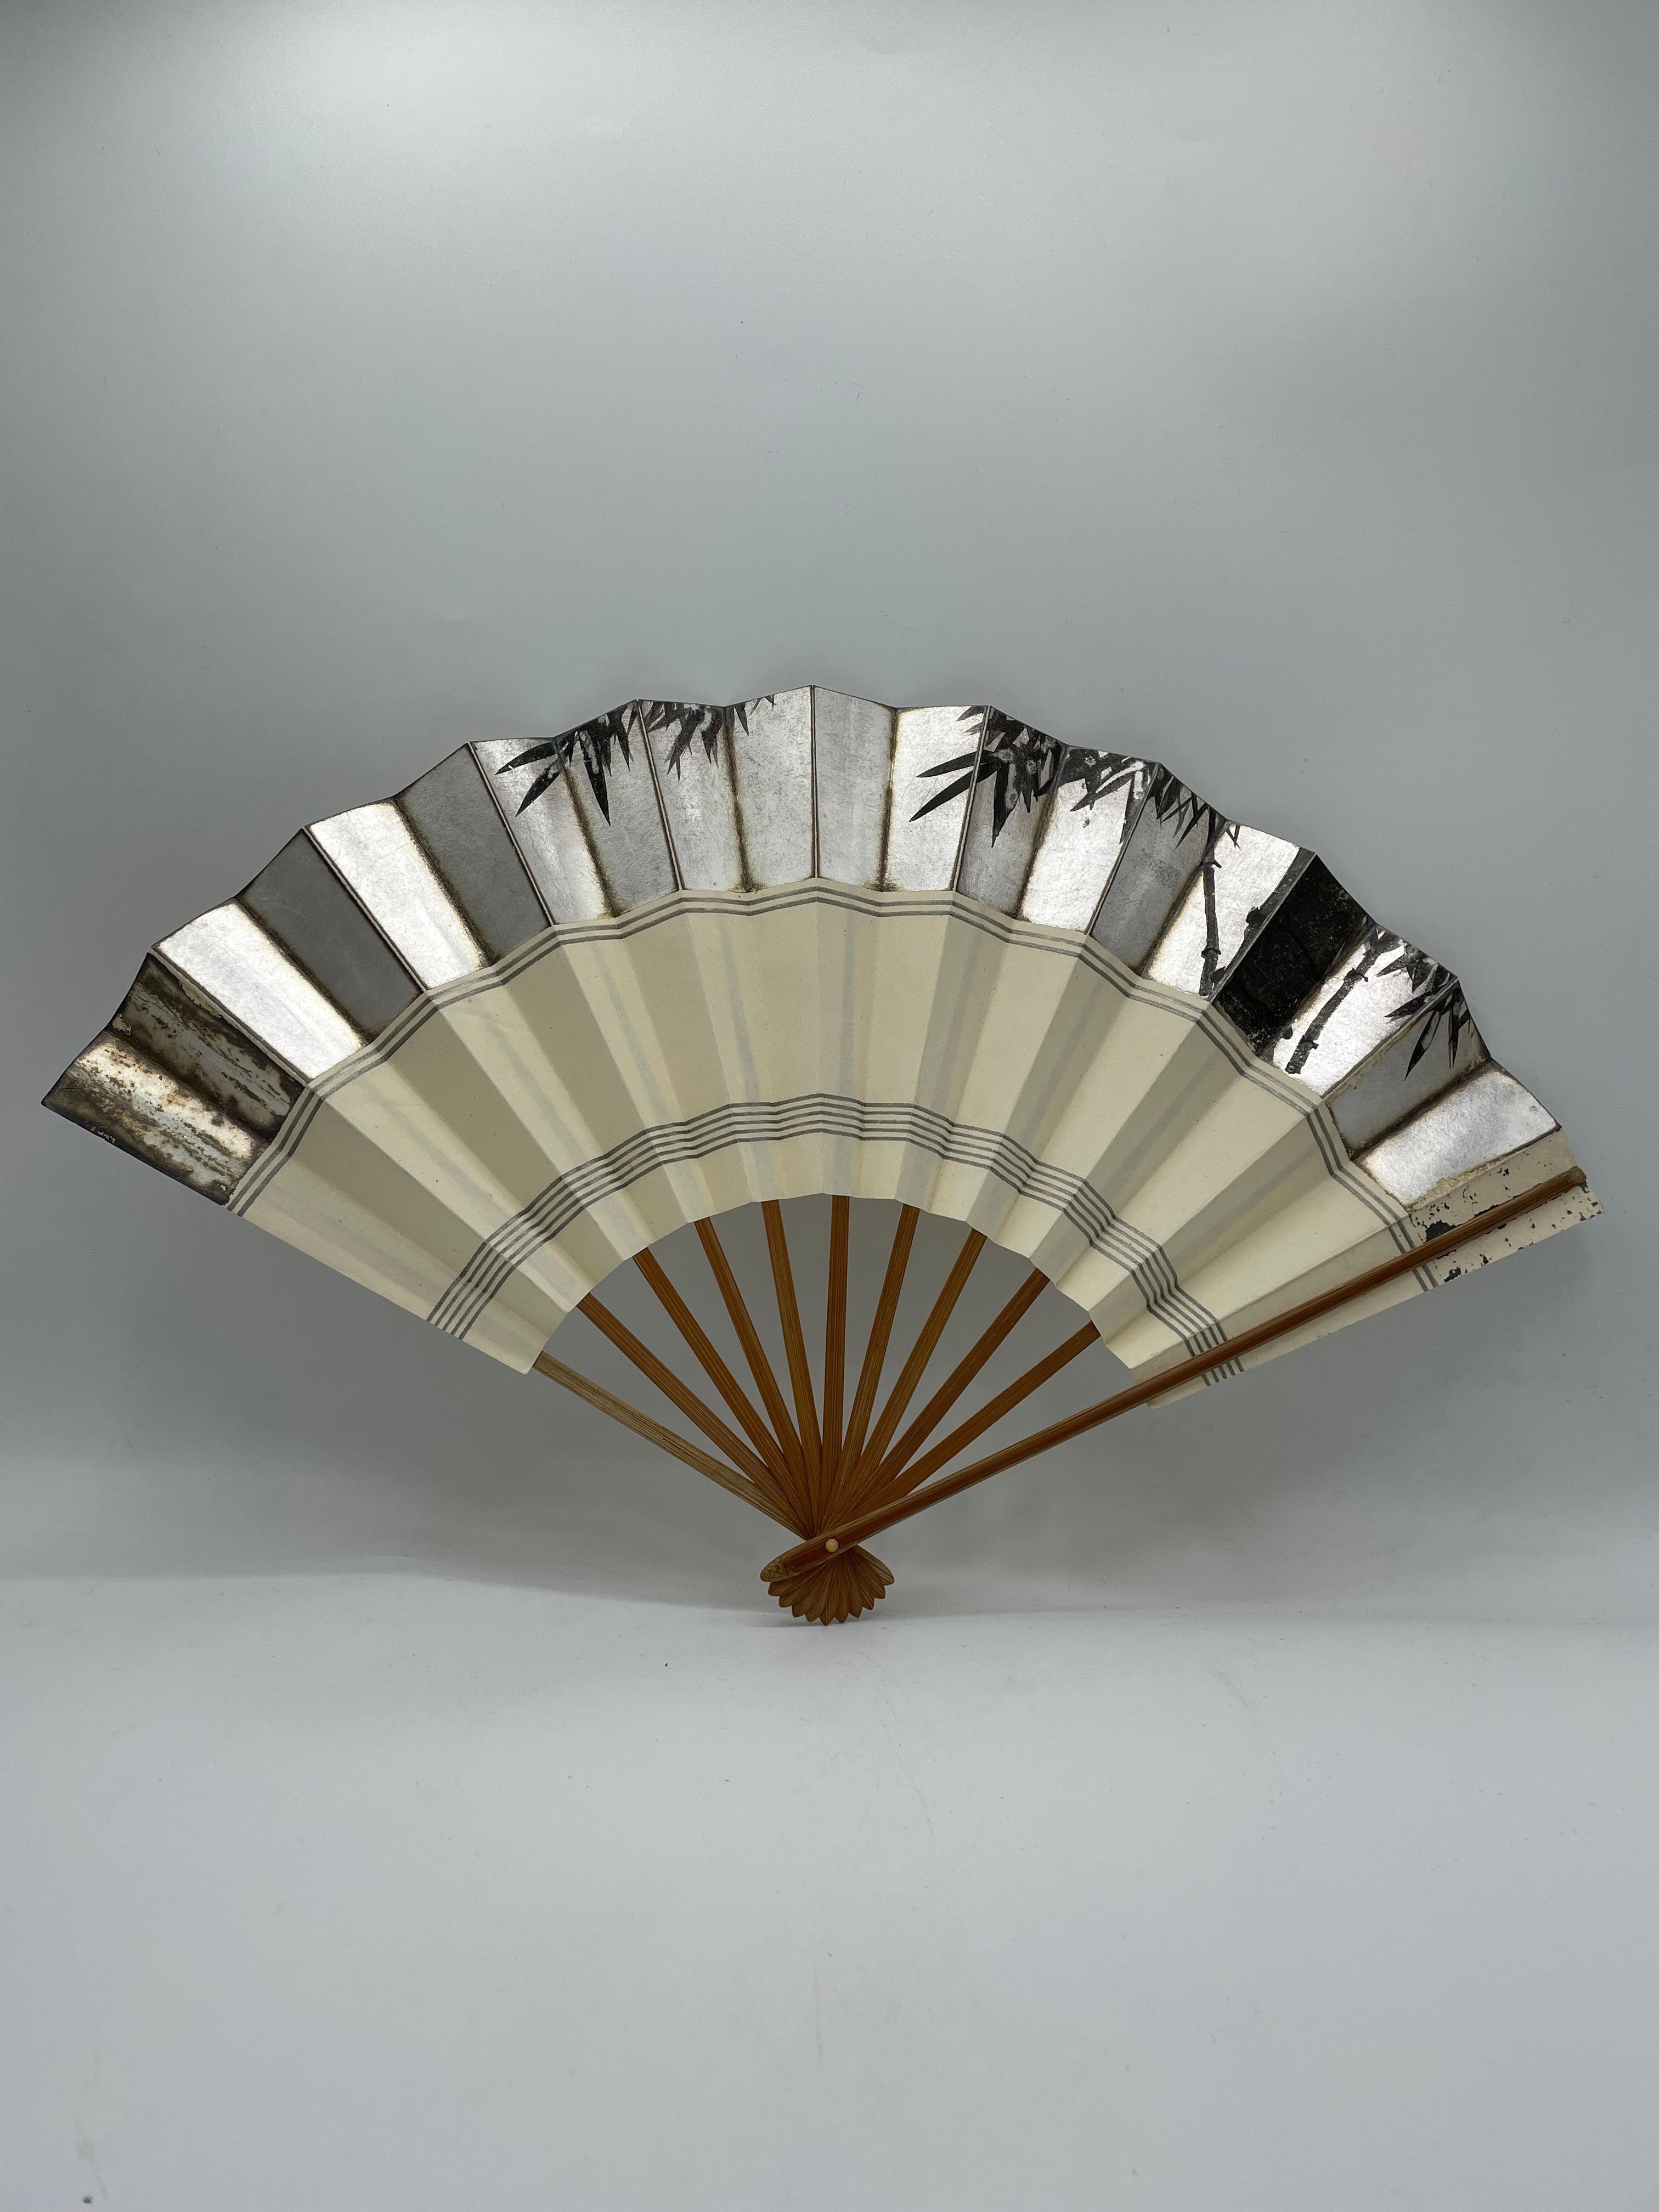 This is a fan which was made in Japan around 1980s in Showa era.
This fan is made with bamboo and paper. It is hand painted.

Dimensions:
3 x 46 x H27 cm 

Japanese fans are made of paper on a bamboo frame, usually with a design painted on them. In